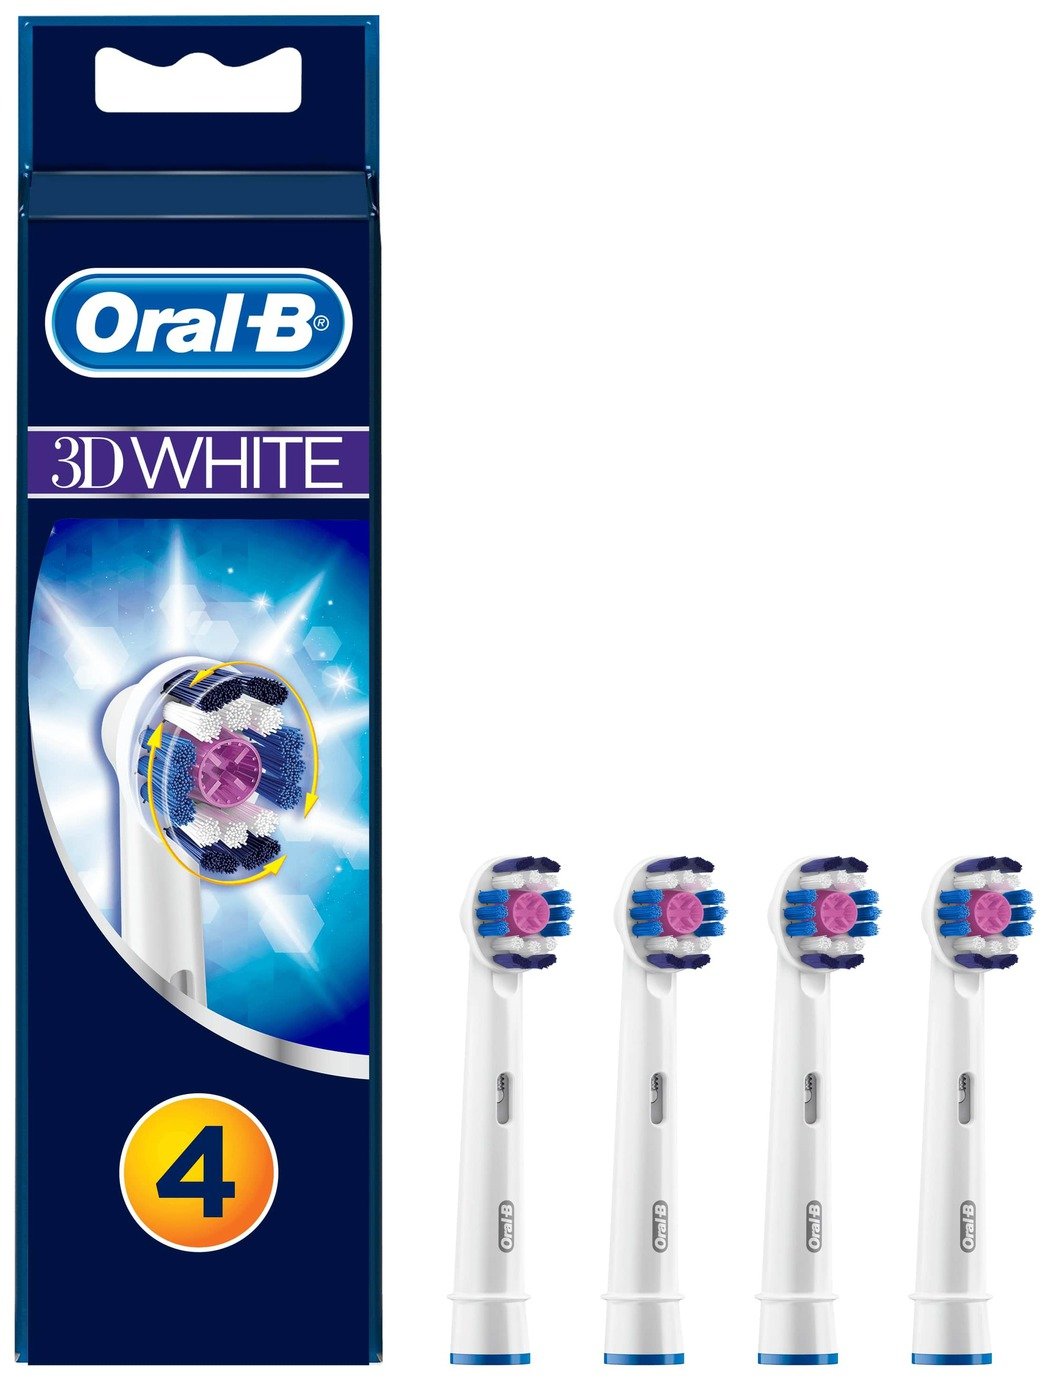 Oral-B 3DWhite Electric Toothbrush Heads - 4 Pack